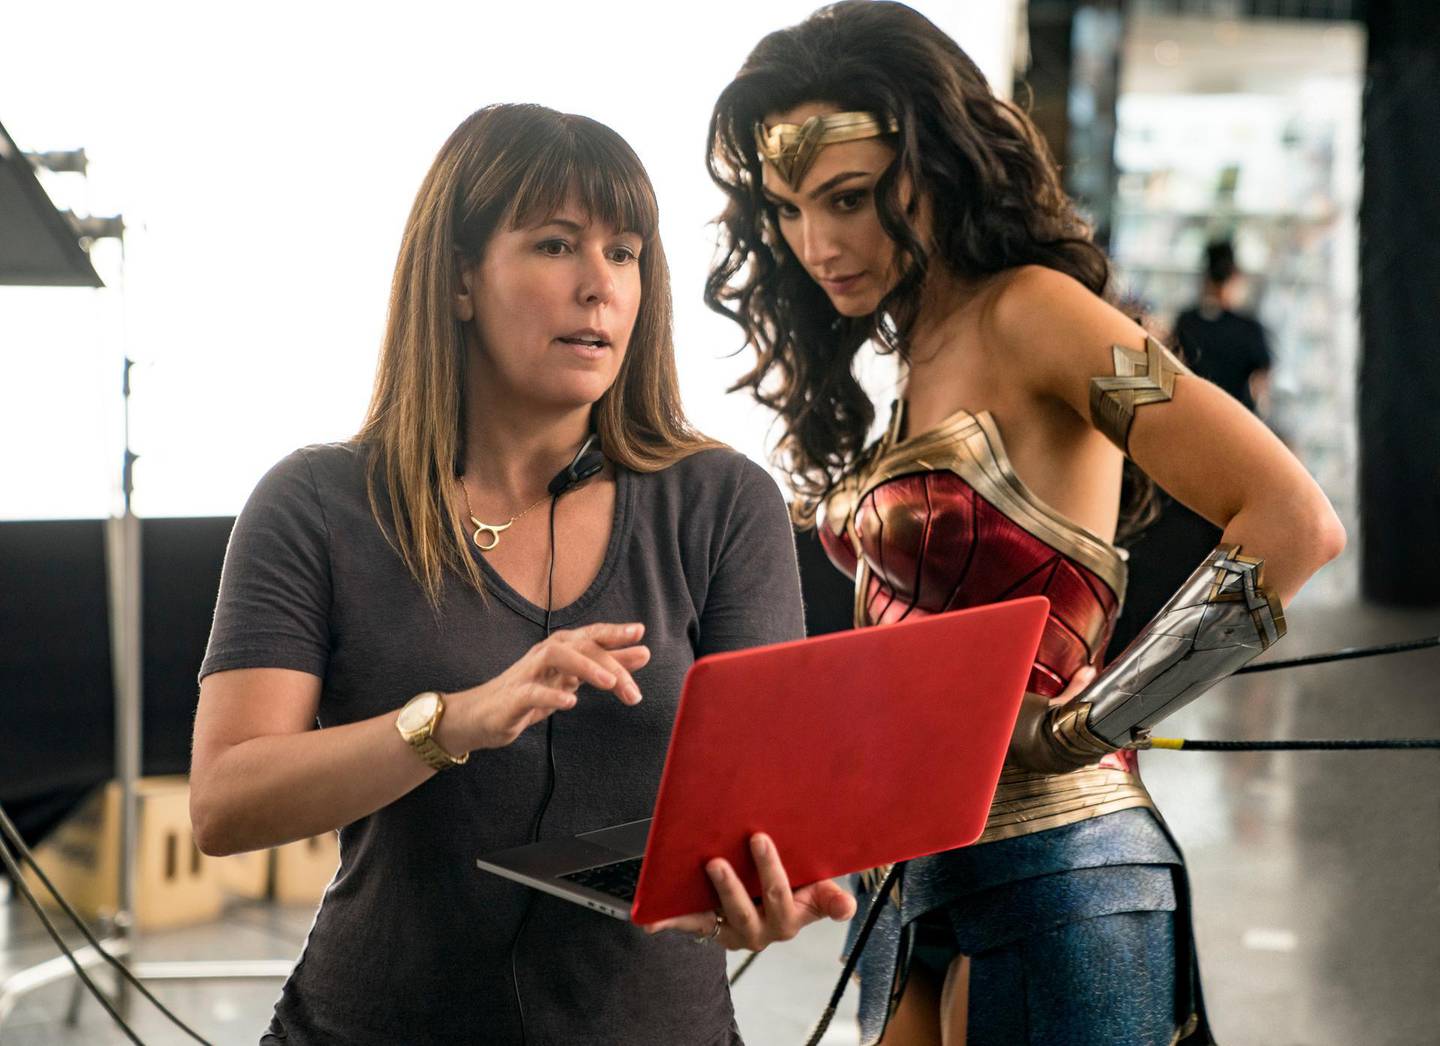 This image released by Warner Bros. Entertainment shows director Patty Jenkins, left, with actress Gal Gadot on the set of "Wonder Woman 1984." (Clay Enos/Warner Bros. Entertainment via AP)